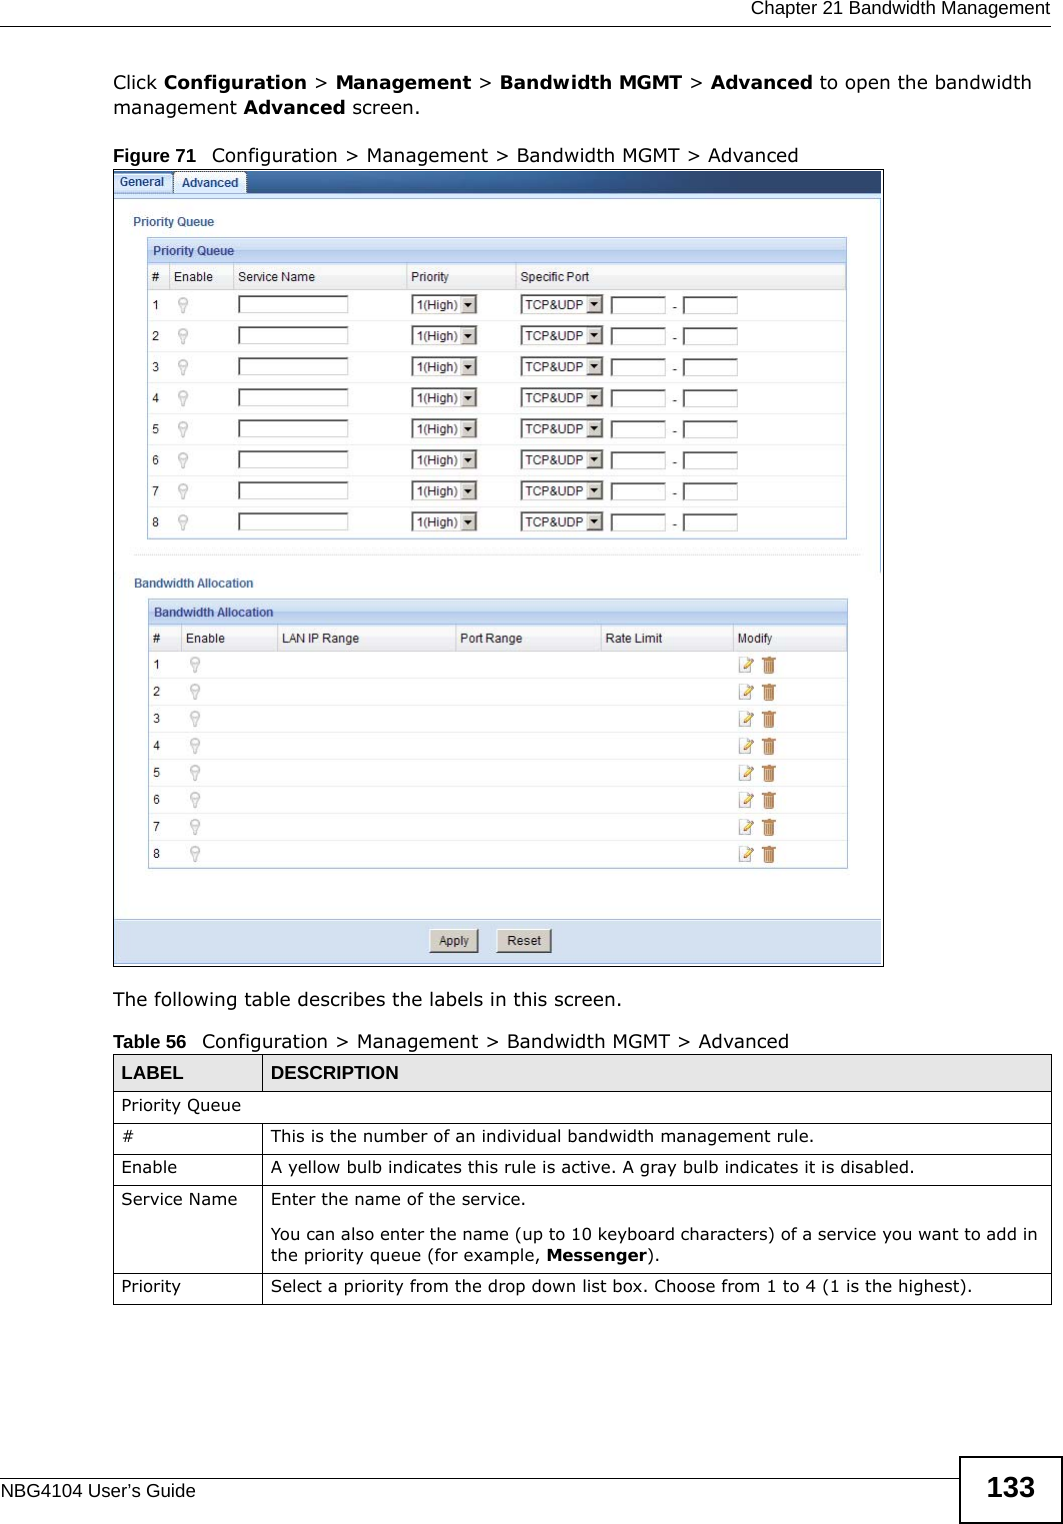  Chapter 21 Bandwidth ManagementNBG4104 User’s Guide 133Click Configuration &gt; Management &gt; Bandwidth MGMT &gt; Advanced to open the bandwidth management Advanced screen.Figure 71   Configuration &gt; Management &gt; Bandwidth MGMT &gt; Advanced The following table describes the labels in this screen.Table 56   Configuration &gt; Management &gt; Bandwidth MGMT &gt; Advanced LABEL DESCRIPTIONPriority Queue#This is the number of an individual bandwidth management rule.Enable A yellow bulb indicates this rule is active. A gray bulb indicates it is disabled.Service Name Enter the name of the service.You can also enter the name (up to 10 keyboard characters) of a service you want to add in the priority queue (for example, Messenger).Priority Select a priority from the drop down list box. Choose from 1 to 4 (1 is the highest).